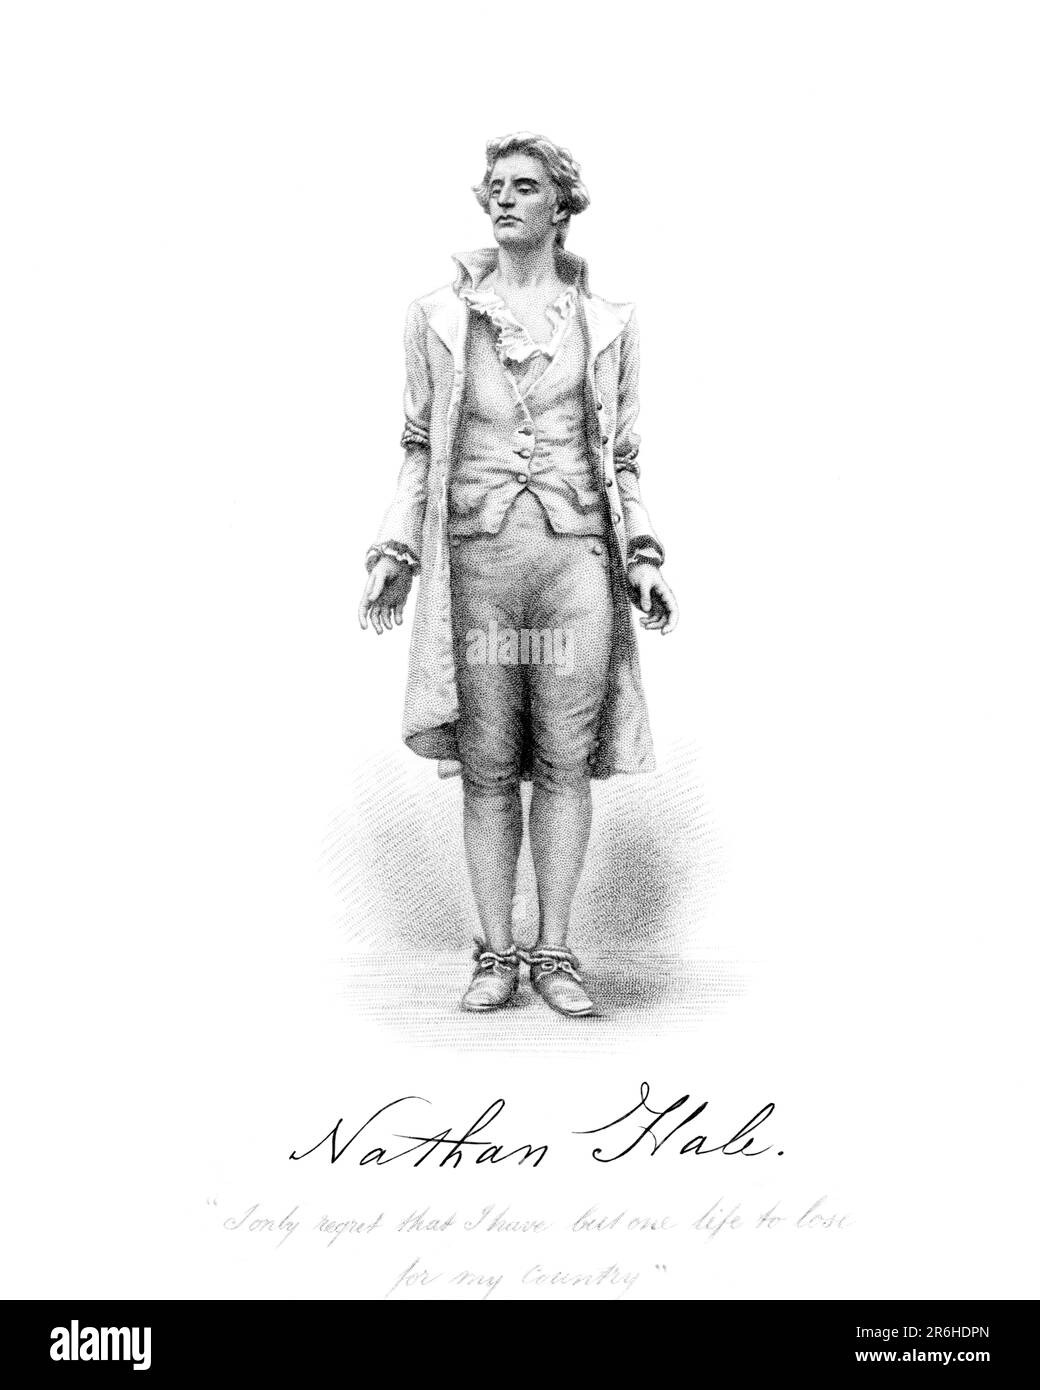 1770s 1776 STANDING PORTRAIT NATHAN HALE TEACHER AND PATRIOT OF AMERICAN REVOLUTIONARY WAR SPY CAPTURED EXECUTED BY BRITISH - q62270 CPC001 HARS COURAGE AND BY 1776 PATRIOT POLITICS SPIES WAR OF INDEPENDENCE HALE SIGNATURE EXECUTED NEW YORK CITY REVOLT AMERICAN REVOLUTIONARY WAR COVENTRY 1770s COLONIES HERO MISSION NATHAN YOUNG ADULT MAN BLACK AND WHITE CAPTURED CAUCASIAN ETHNICITY CONNECTICUT CONTINENTAL ARMY CT OLD FASHIONED Stock Photo